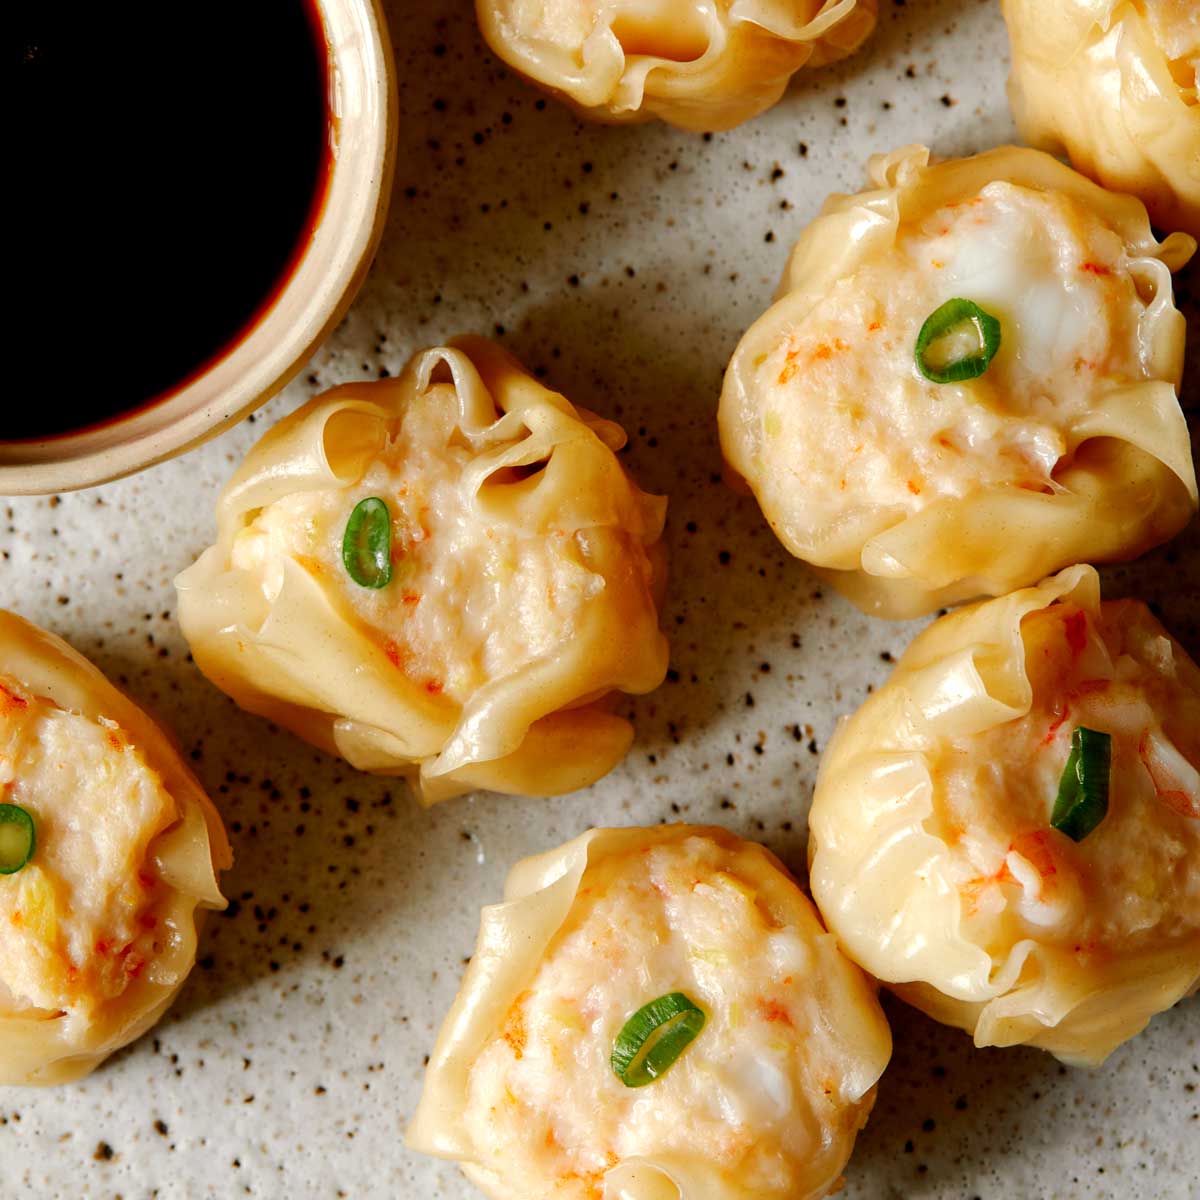 17 Recipes for Making a Dim Sum at Home